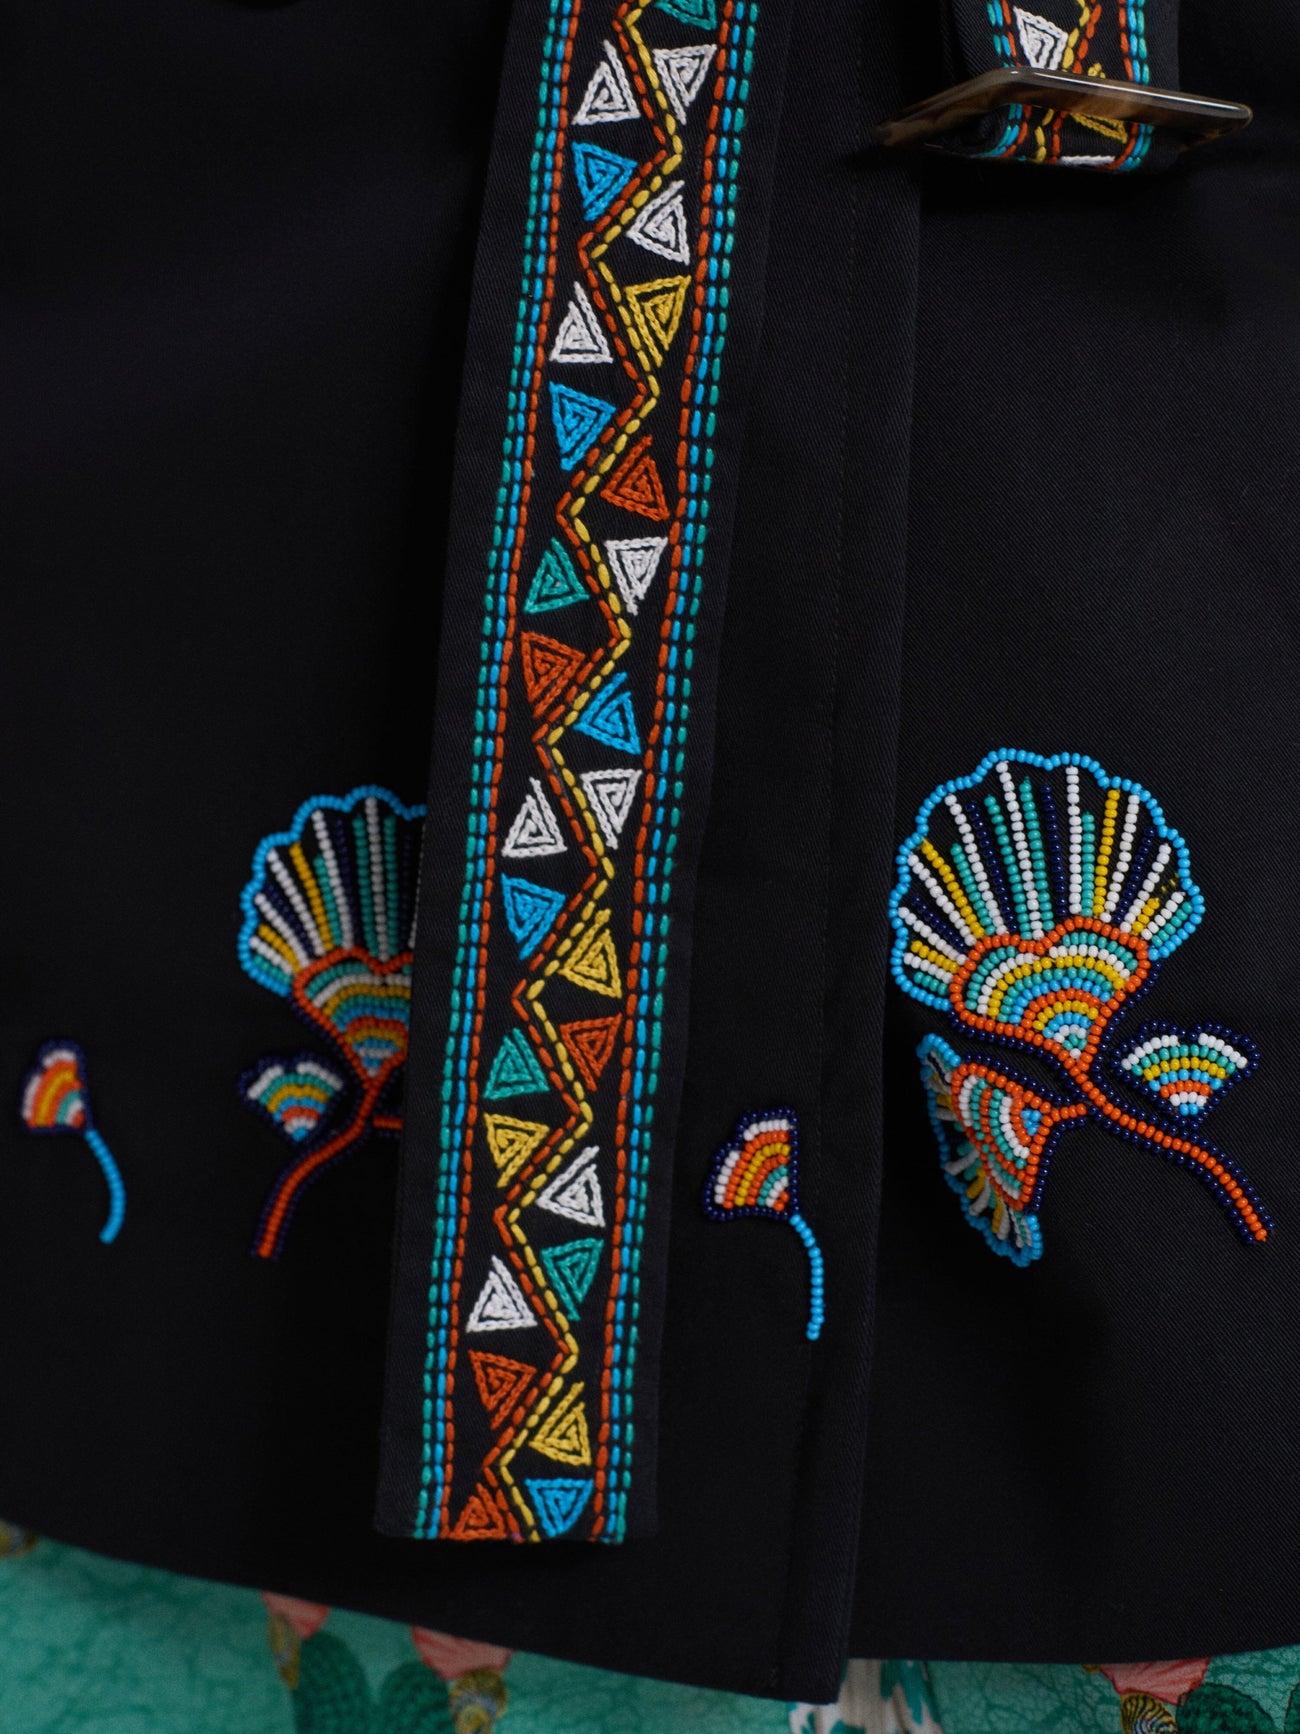 Load image into Gallery viewer, Short Trench Black with Shell Embroidery